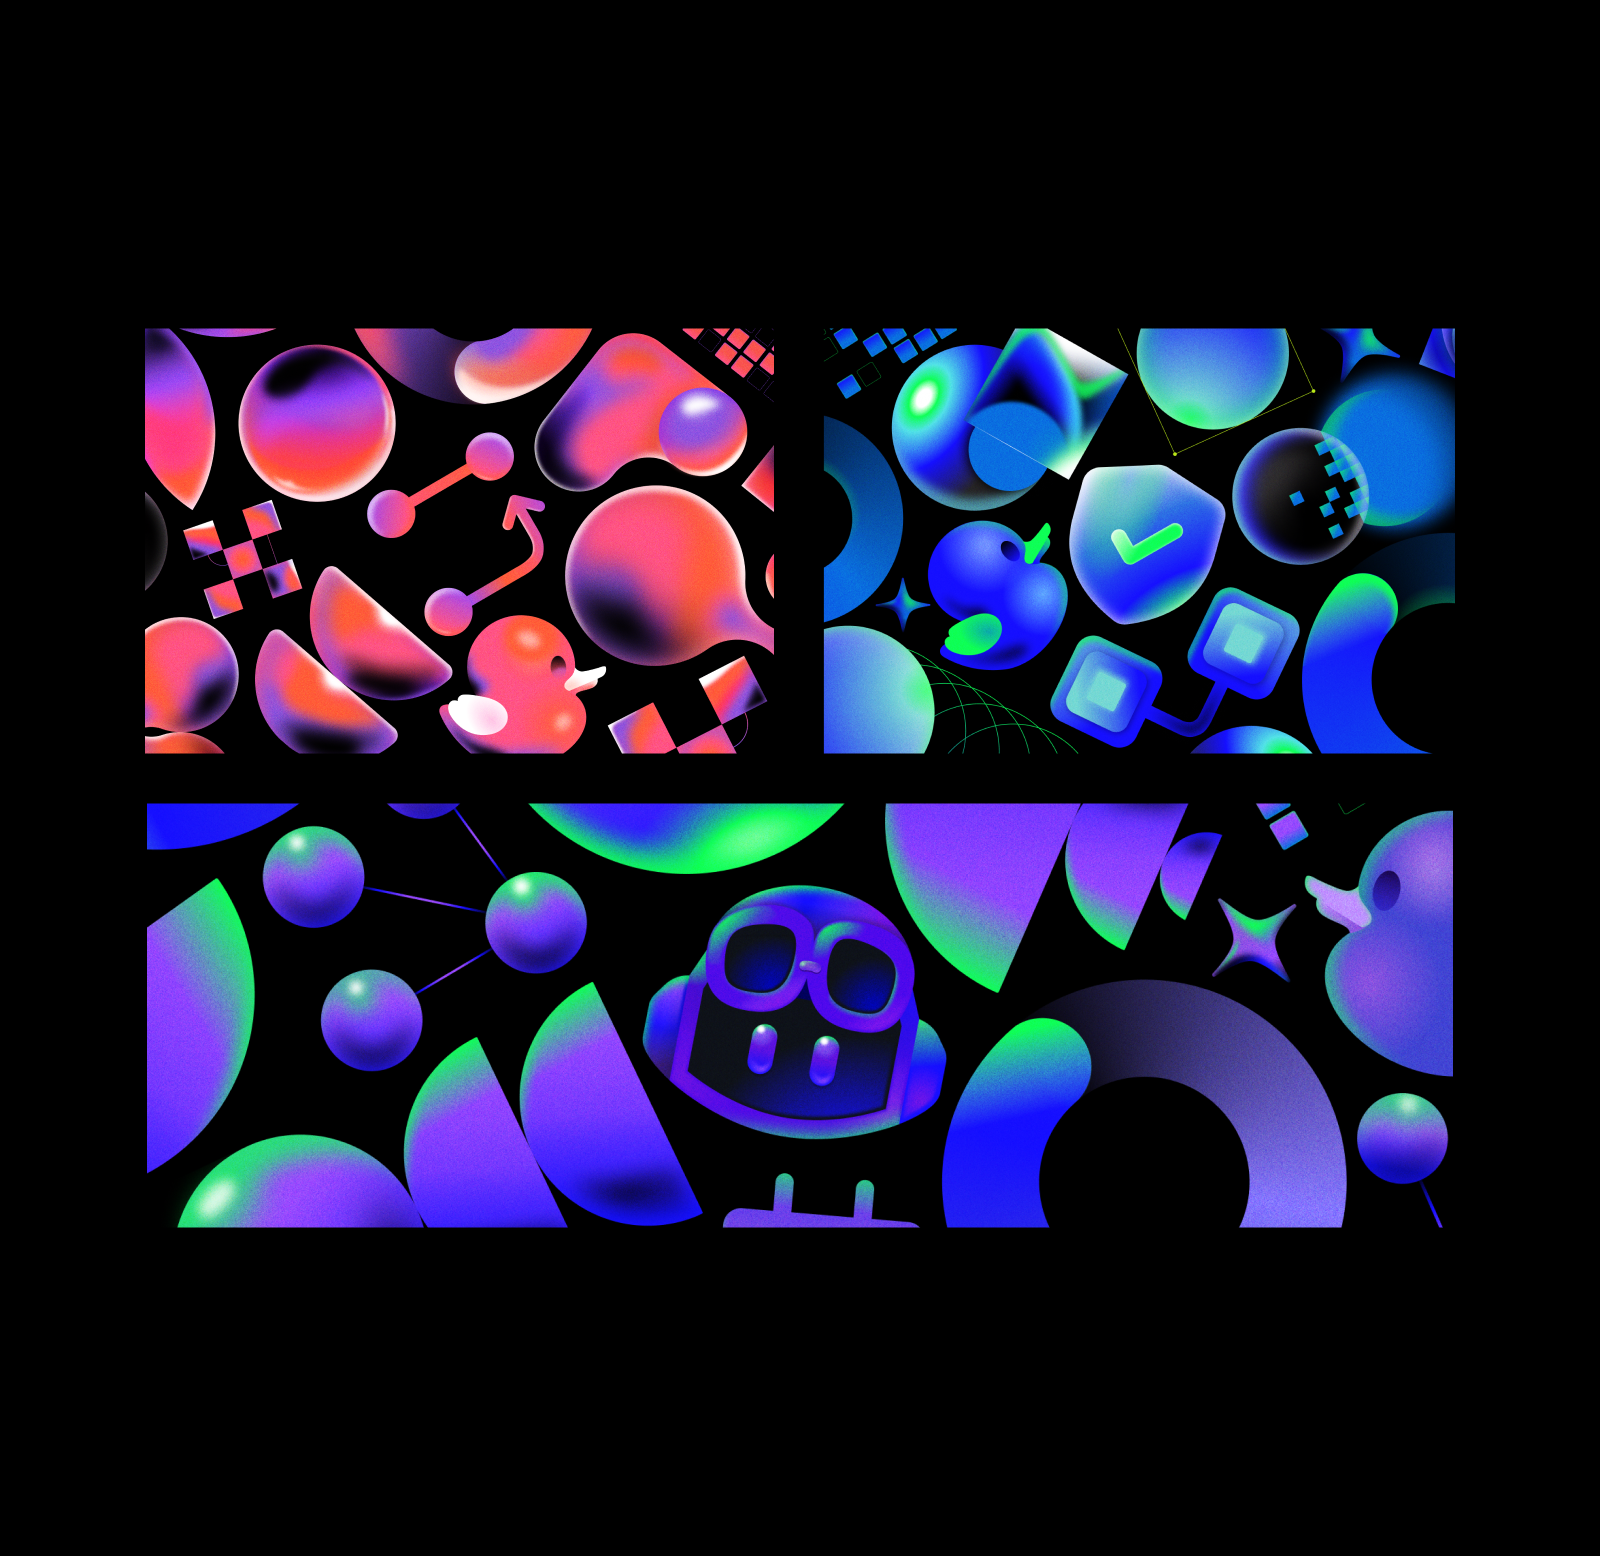 Three illustration compositions featuring various abstract shapes surrounding a central stylized Octicon. The first composition is pink and features a pull request Octicon. The second composition is blue and features a security Octicon. The third composition is purply and features a Copilot Octicon.